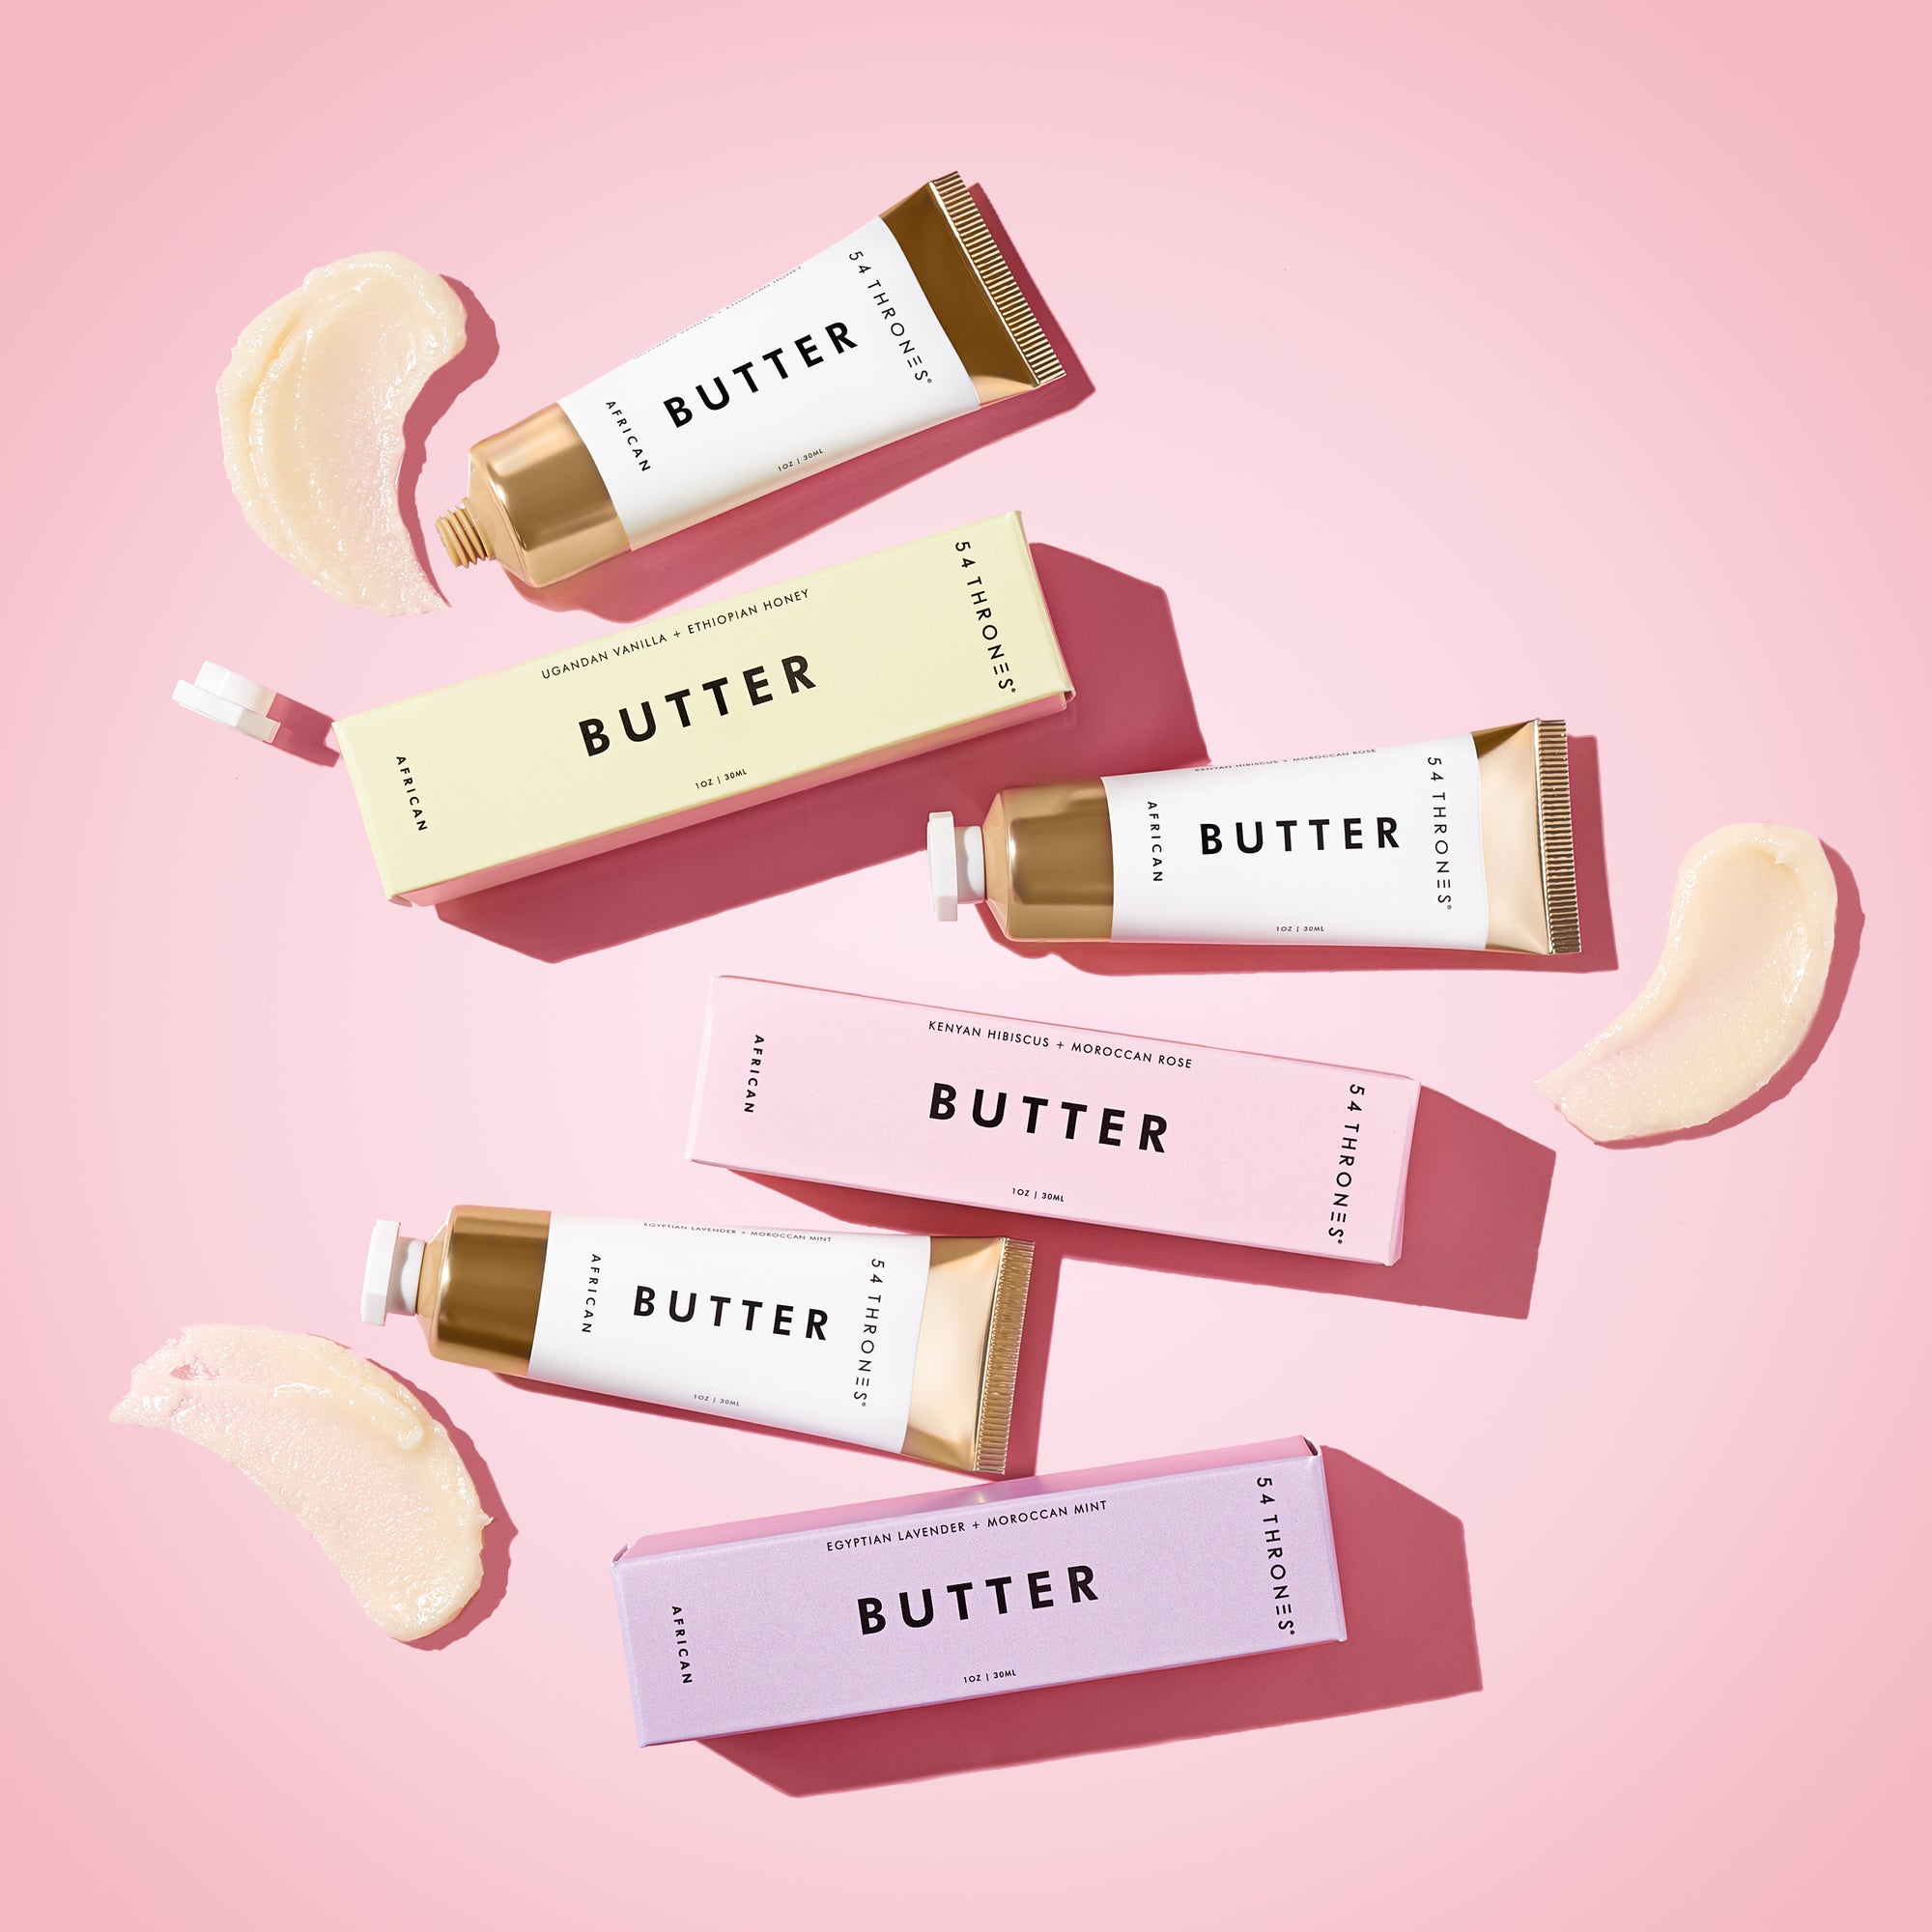 Three Mini Beauty Butter tubes and pastel-colored boxes against a pink background | 54 Thrones